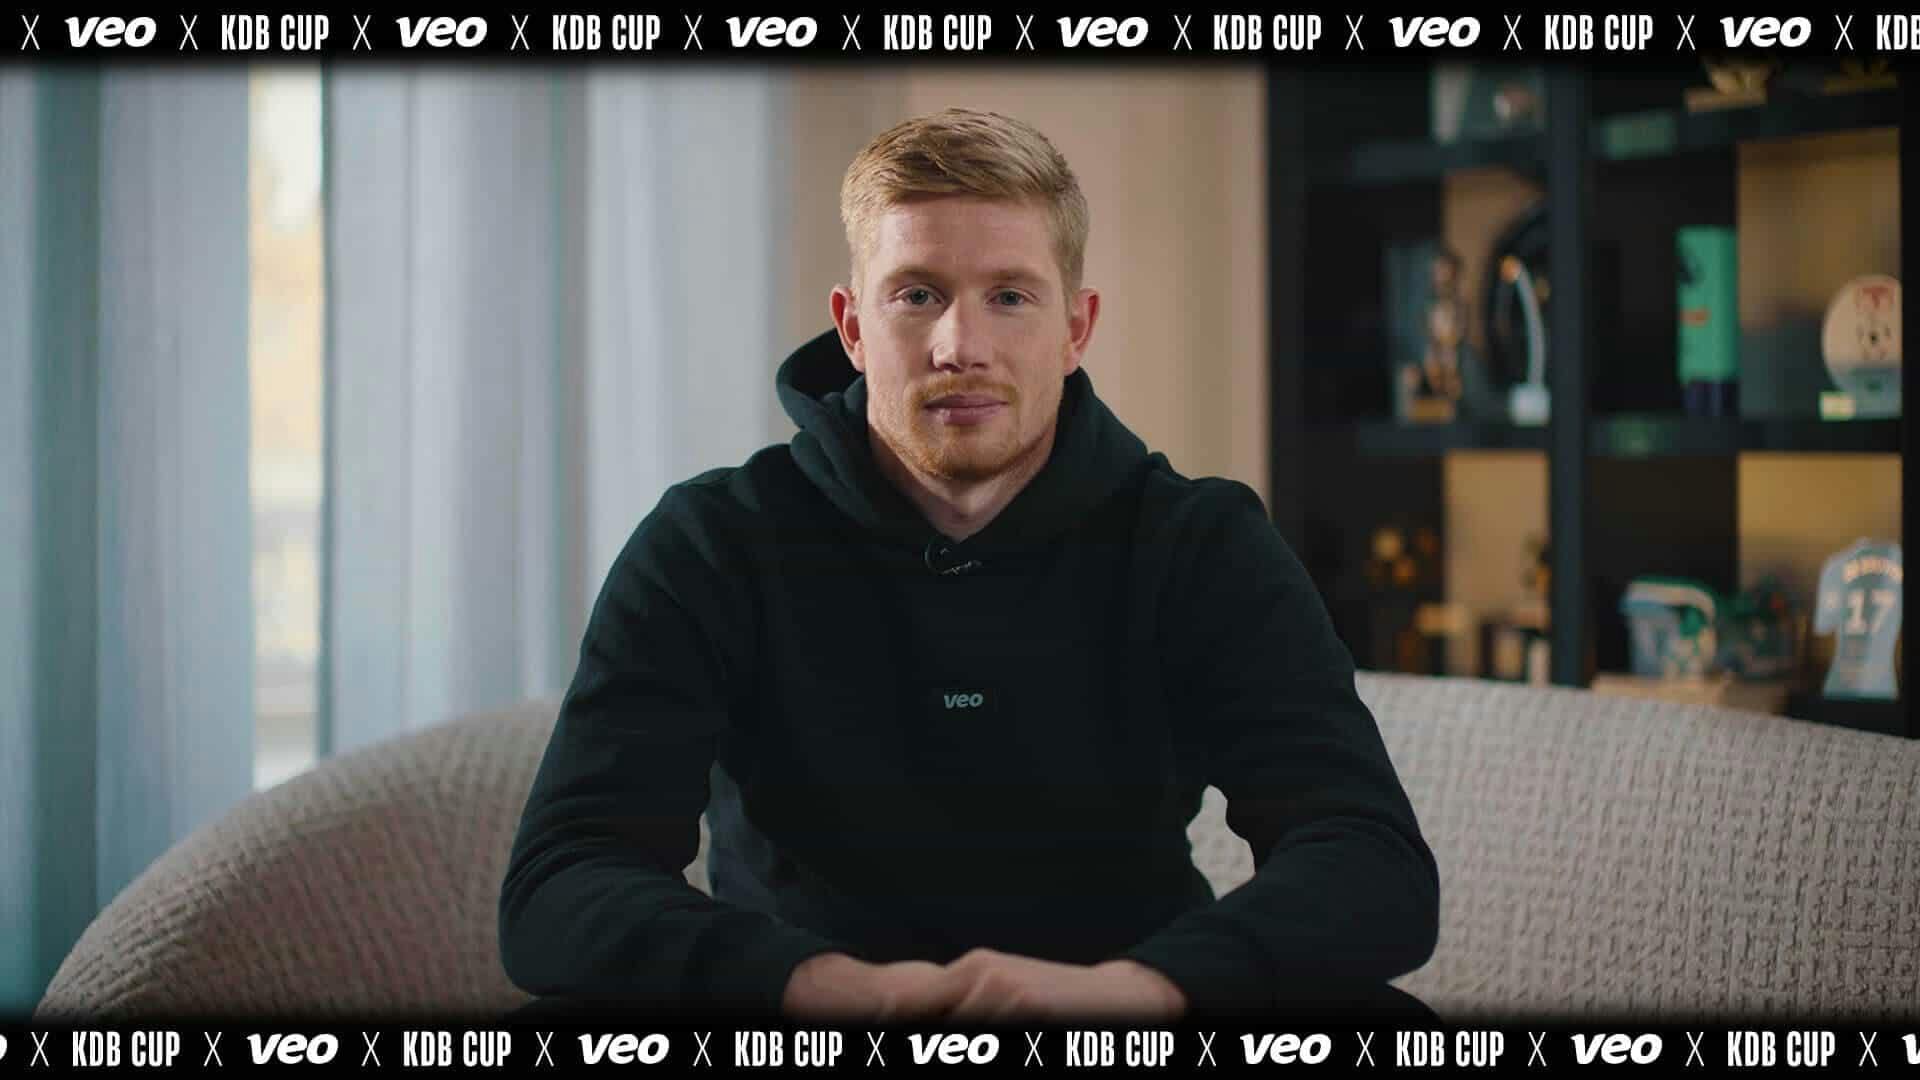 Photo of Kevin de Bruyne sitting comfortably on a couch while holding a Veo soccer camera in his hand. He is dressed in casual sportswear and has a focused expression on his face as he looks at the camera